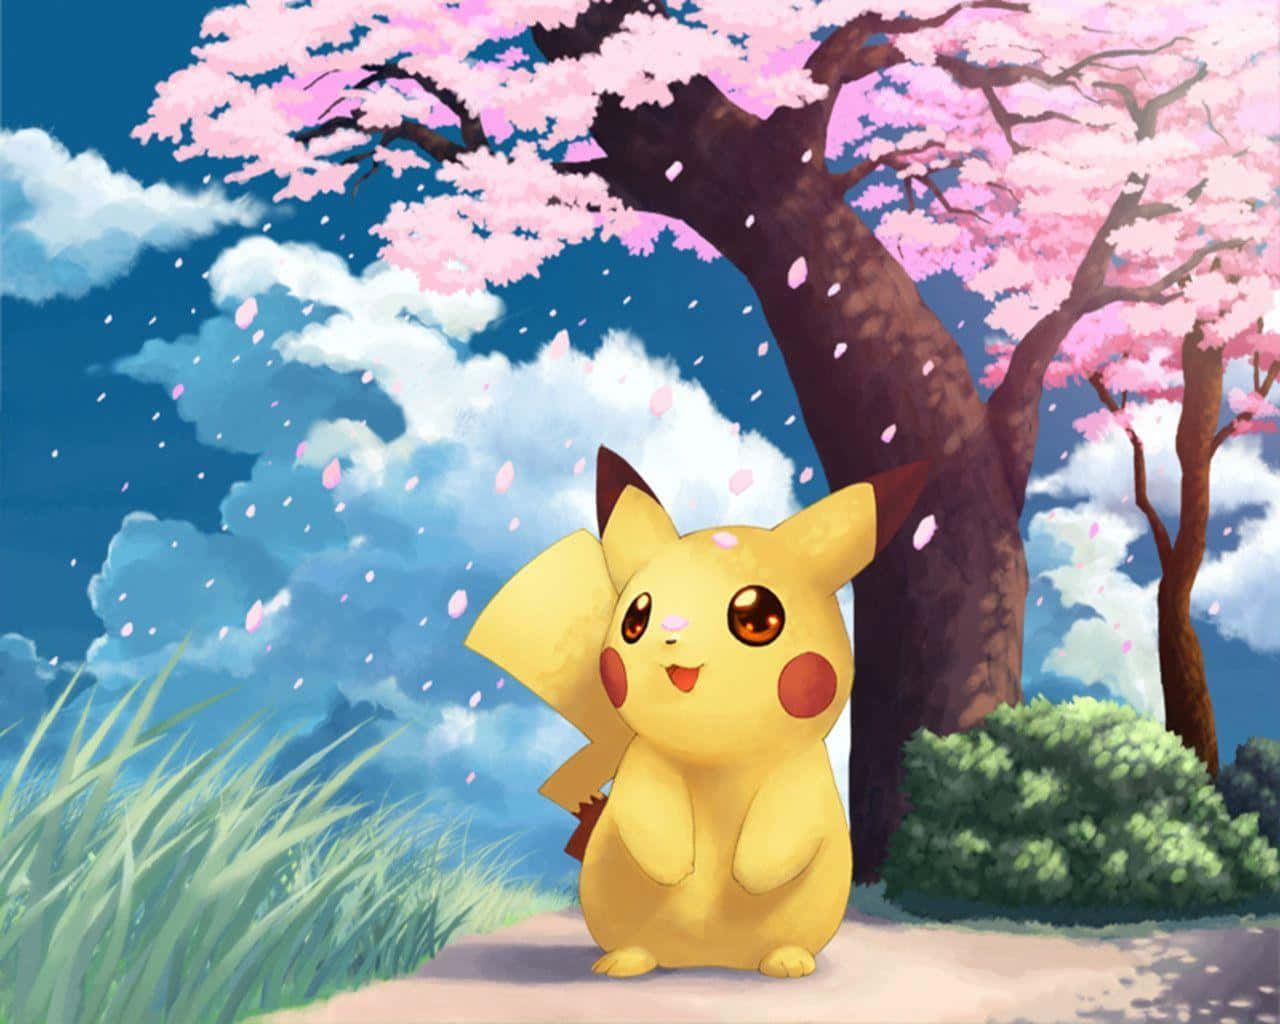 Adorable Baby Pikachu Sitting On A Wooden Log Wallpaper